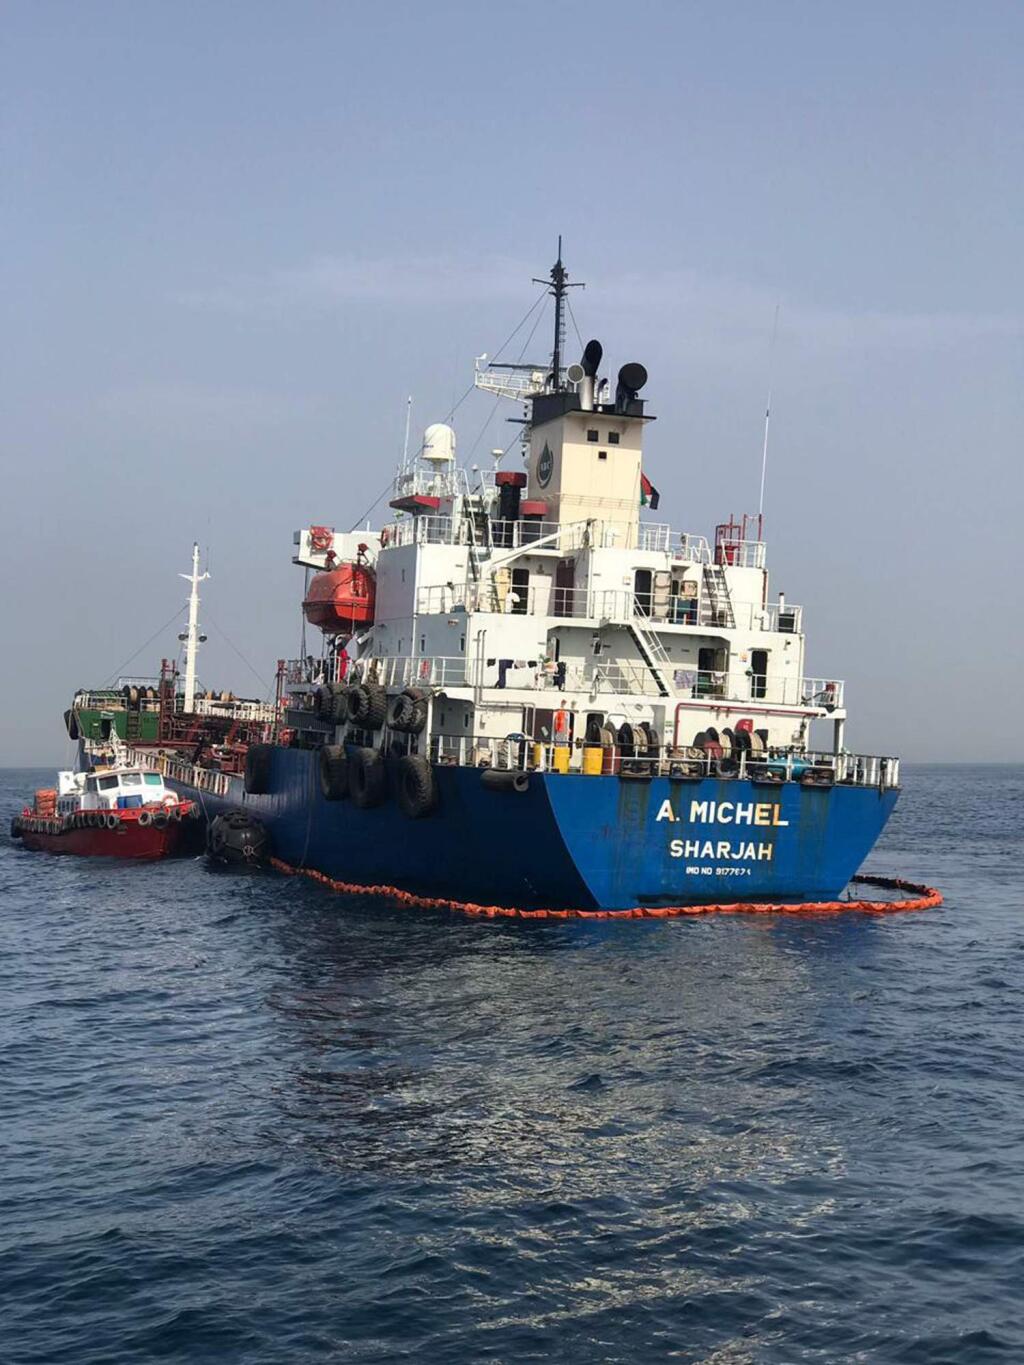 This photo provided by the United Arab Emirates' National Media Council shows the Emirati-flagged bunkering tanker A. Michel off the coast of Fujairah, United Arab Emirates, Monday, May 13, 2019. Two Saudi oil tankers and a Norwegian-flagged vessel were damaged in what Gulf officials described Monday as a 'sabotage' attack off the coast of the United Arab Emirates. While details of the incident remain unclear, it raised risks for shippers in a region vital to global energy supplies at a time of increasing tensions between the U.S. and Iran over its unraveling nuclear deal with world powers. (United Arab Emirates National Media Council via AP)